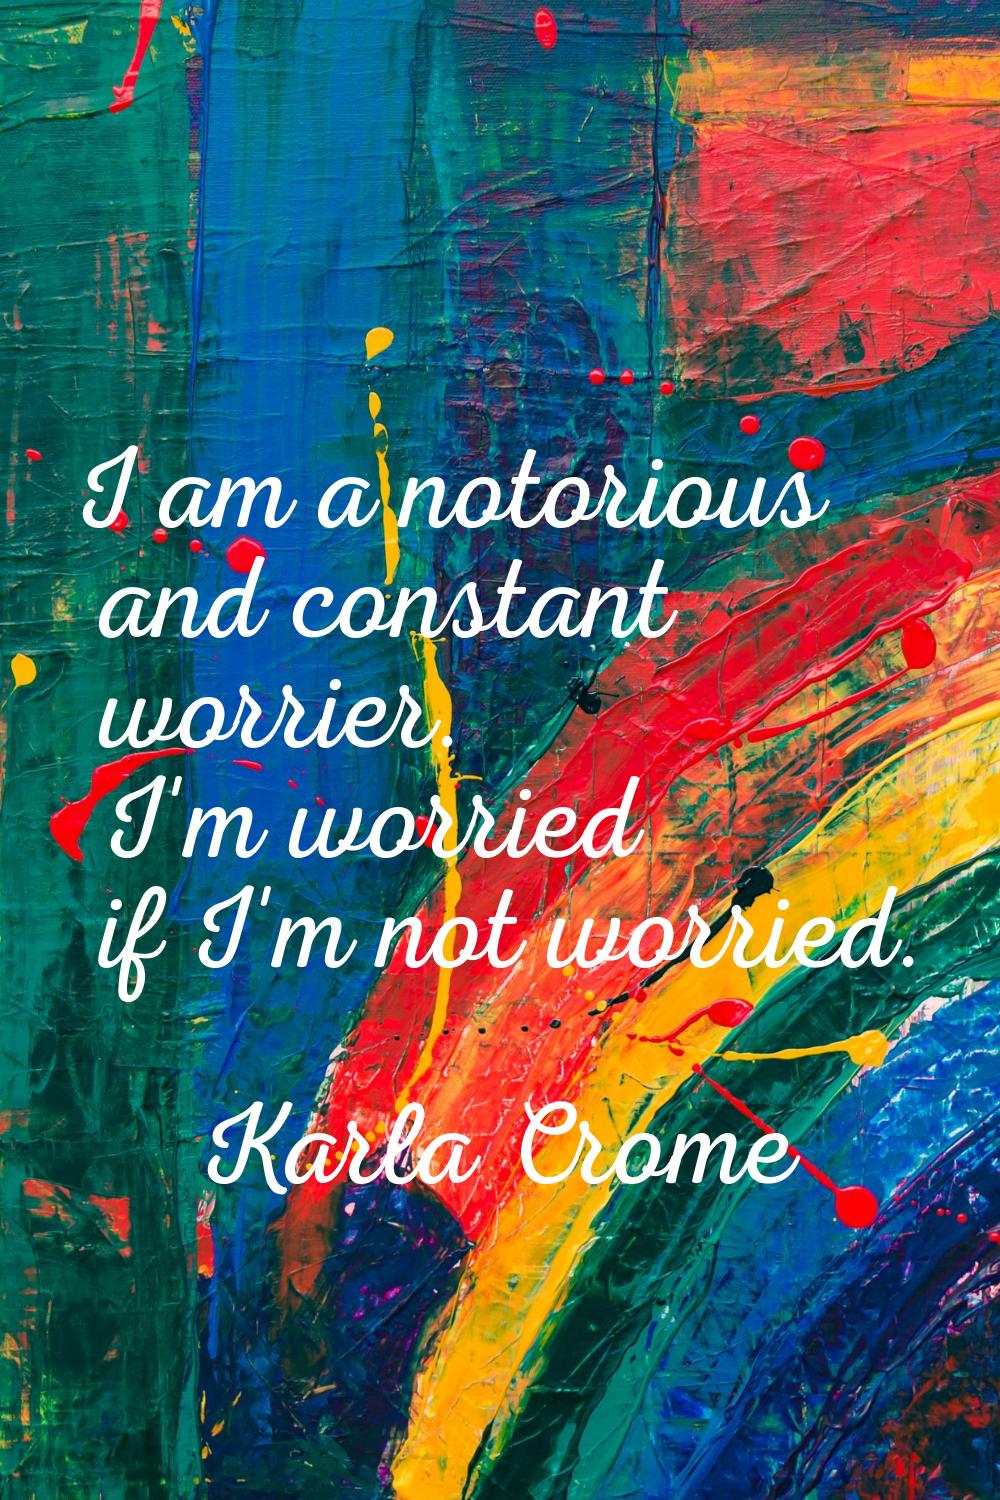 I am a notorious and constant worrier. I'm worried if I'm not worried.